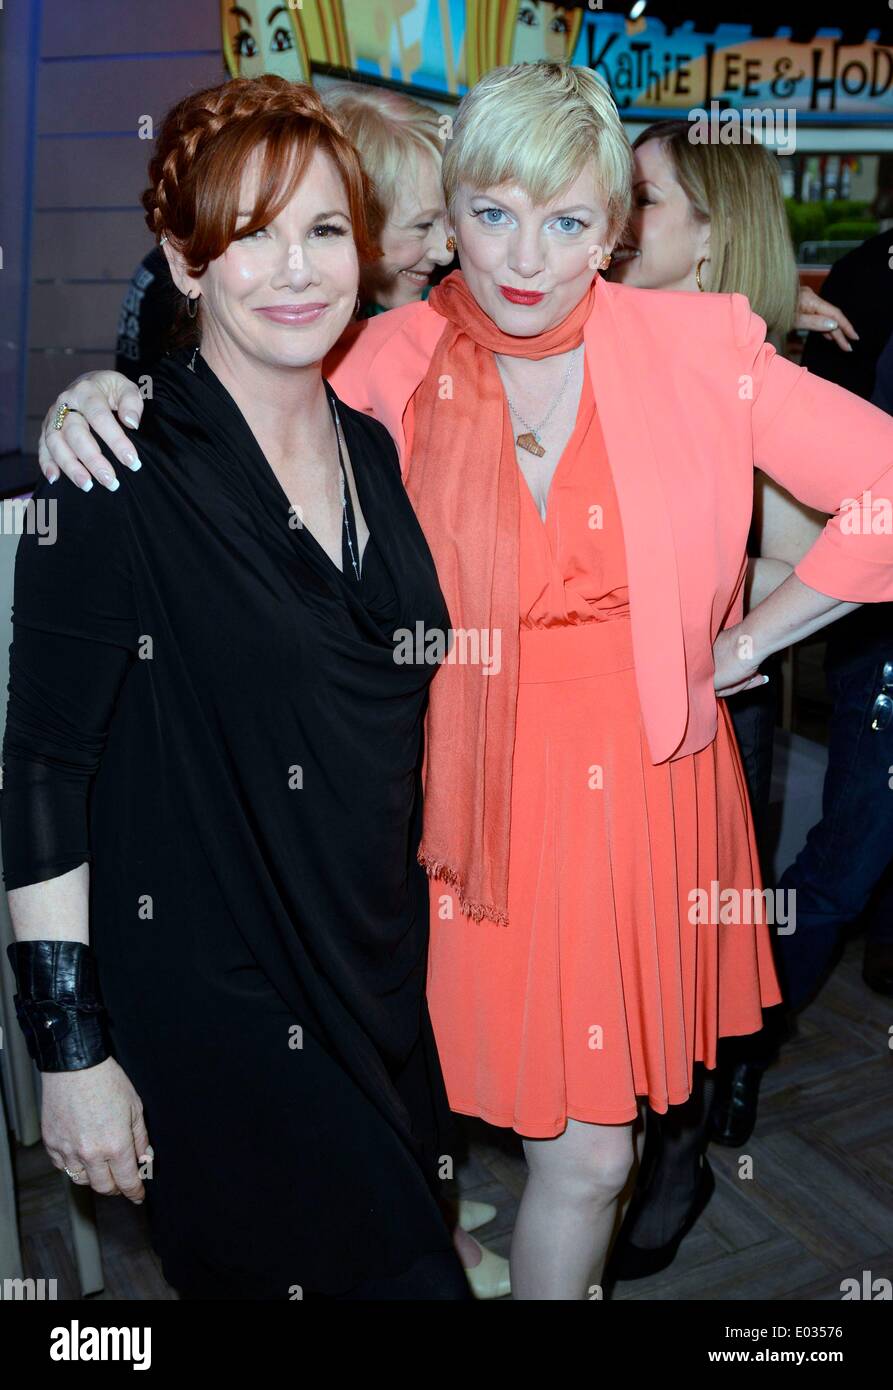 Melissa gilbert 2014 hi-res stock photography and images - Alamy